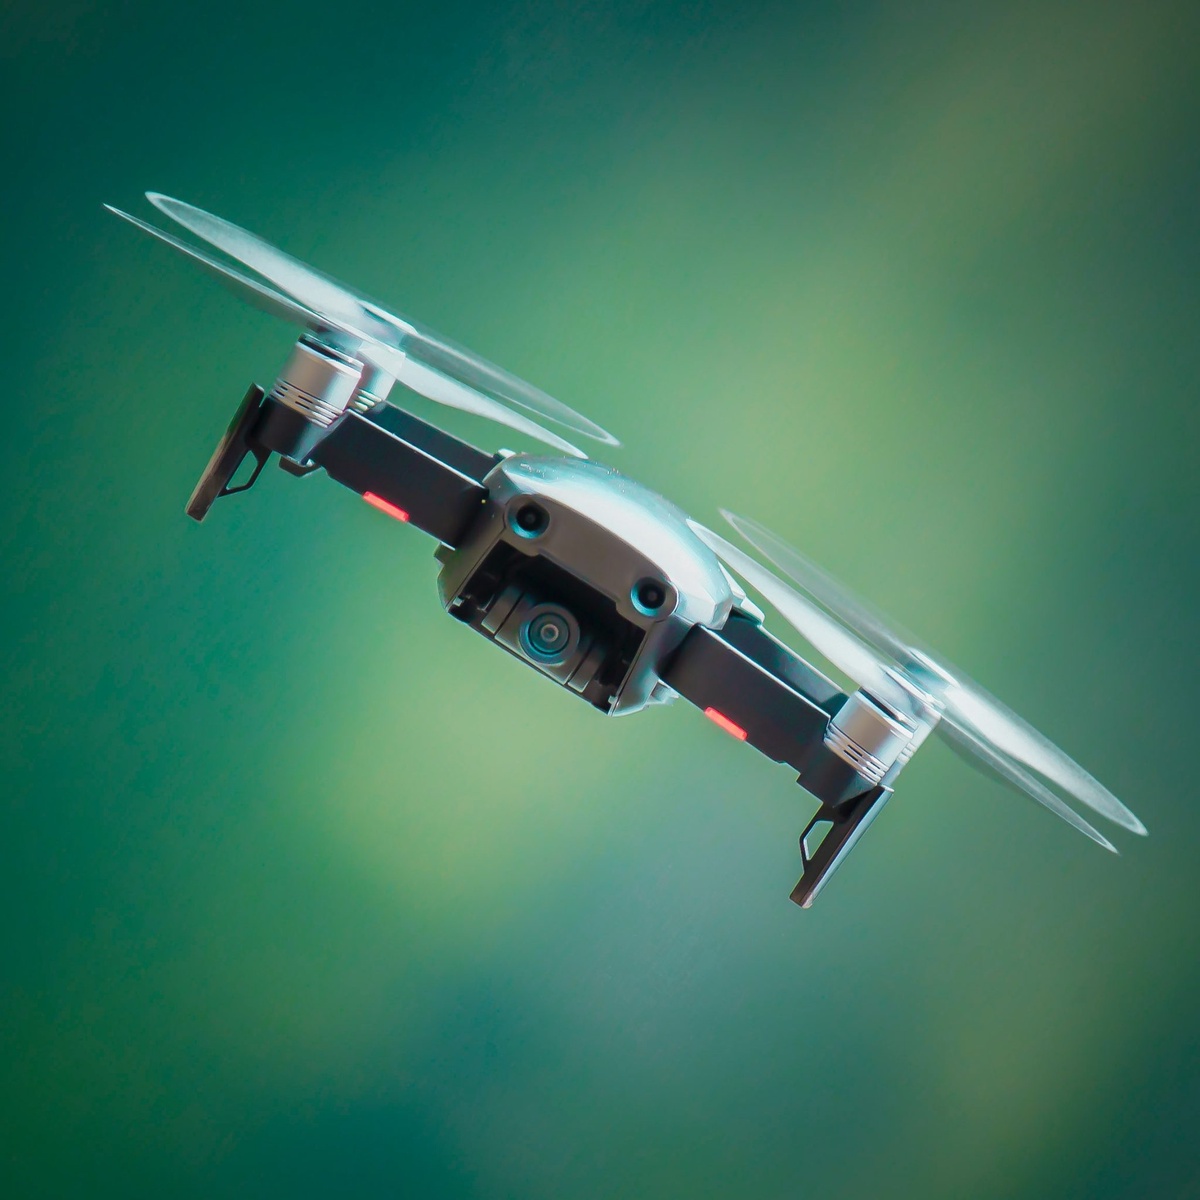 Foldable Drones for Aerial Photography and Adventure